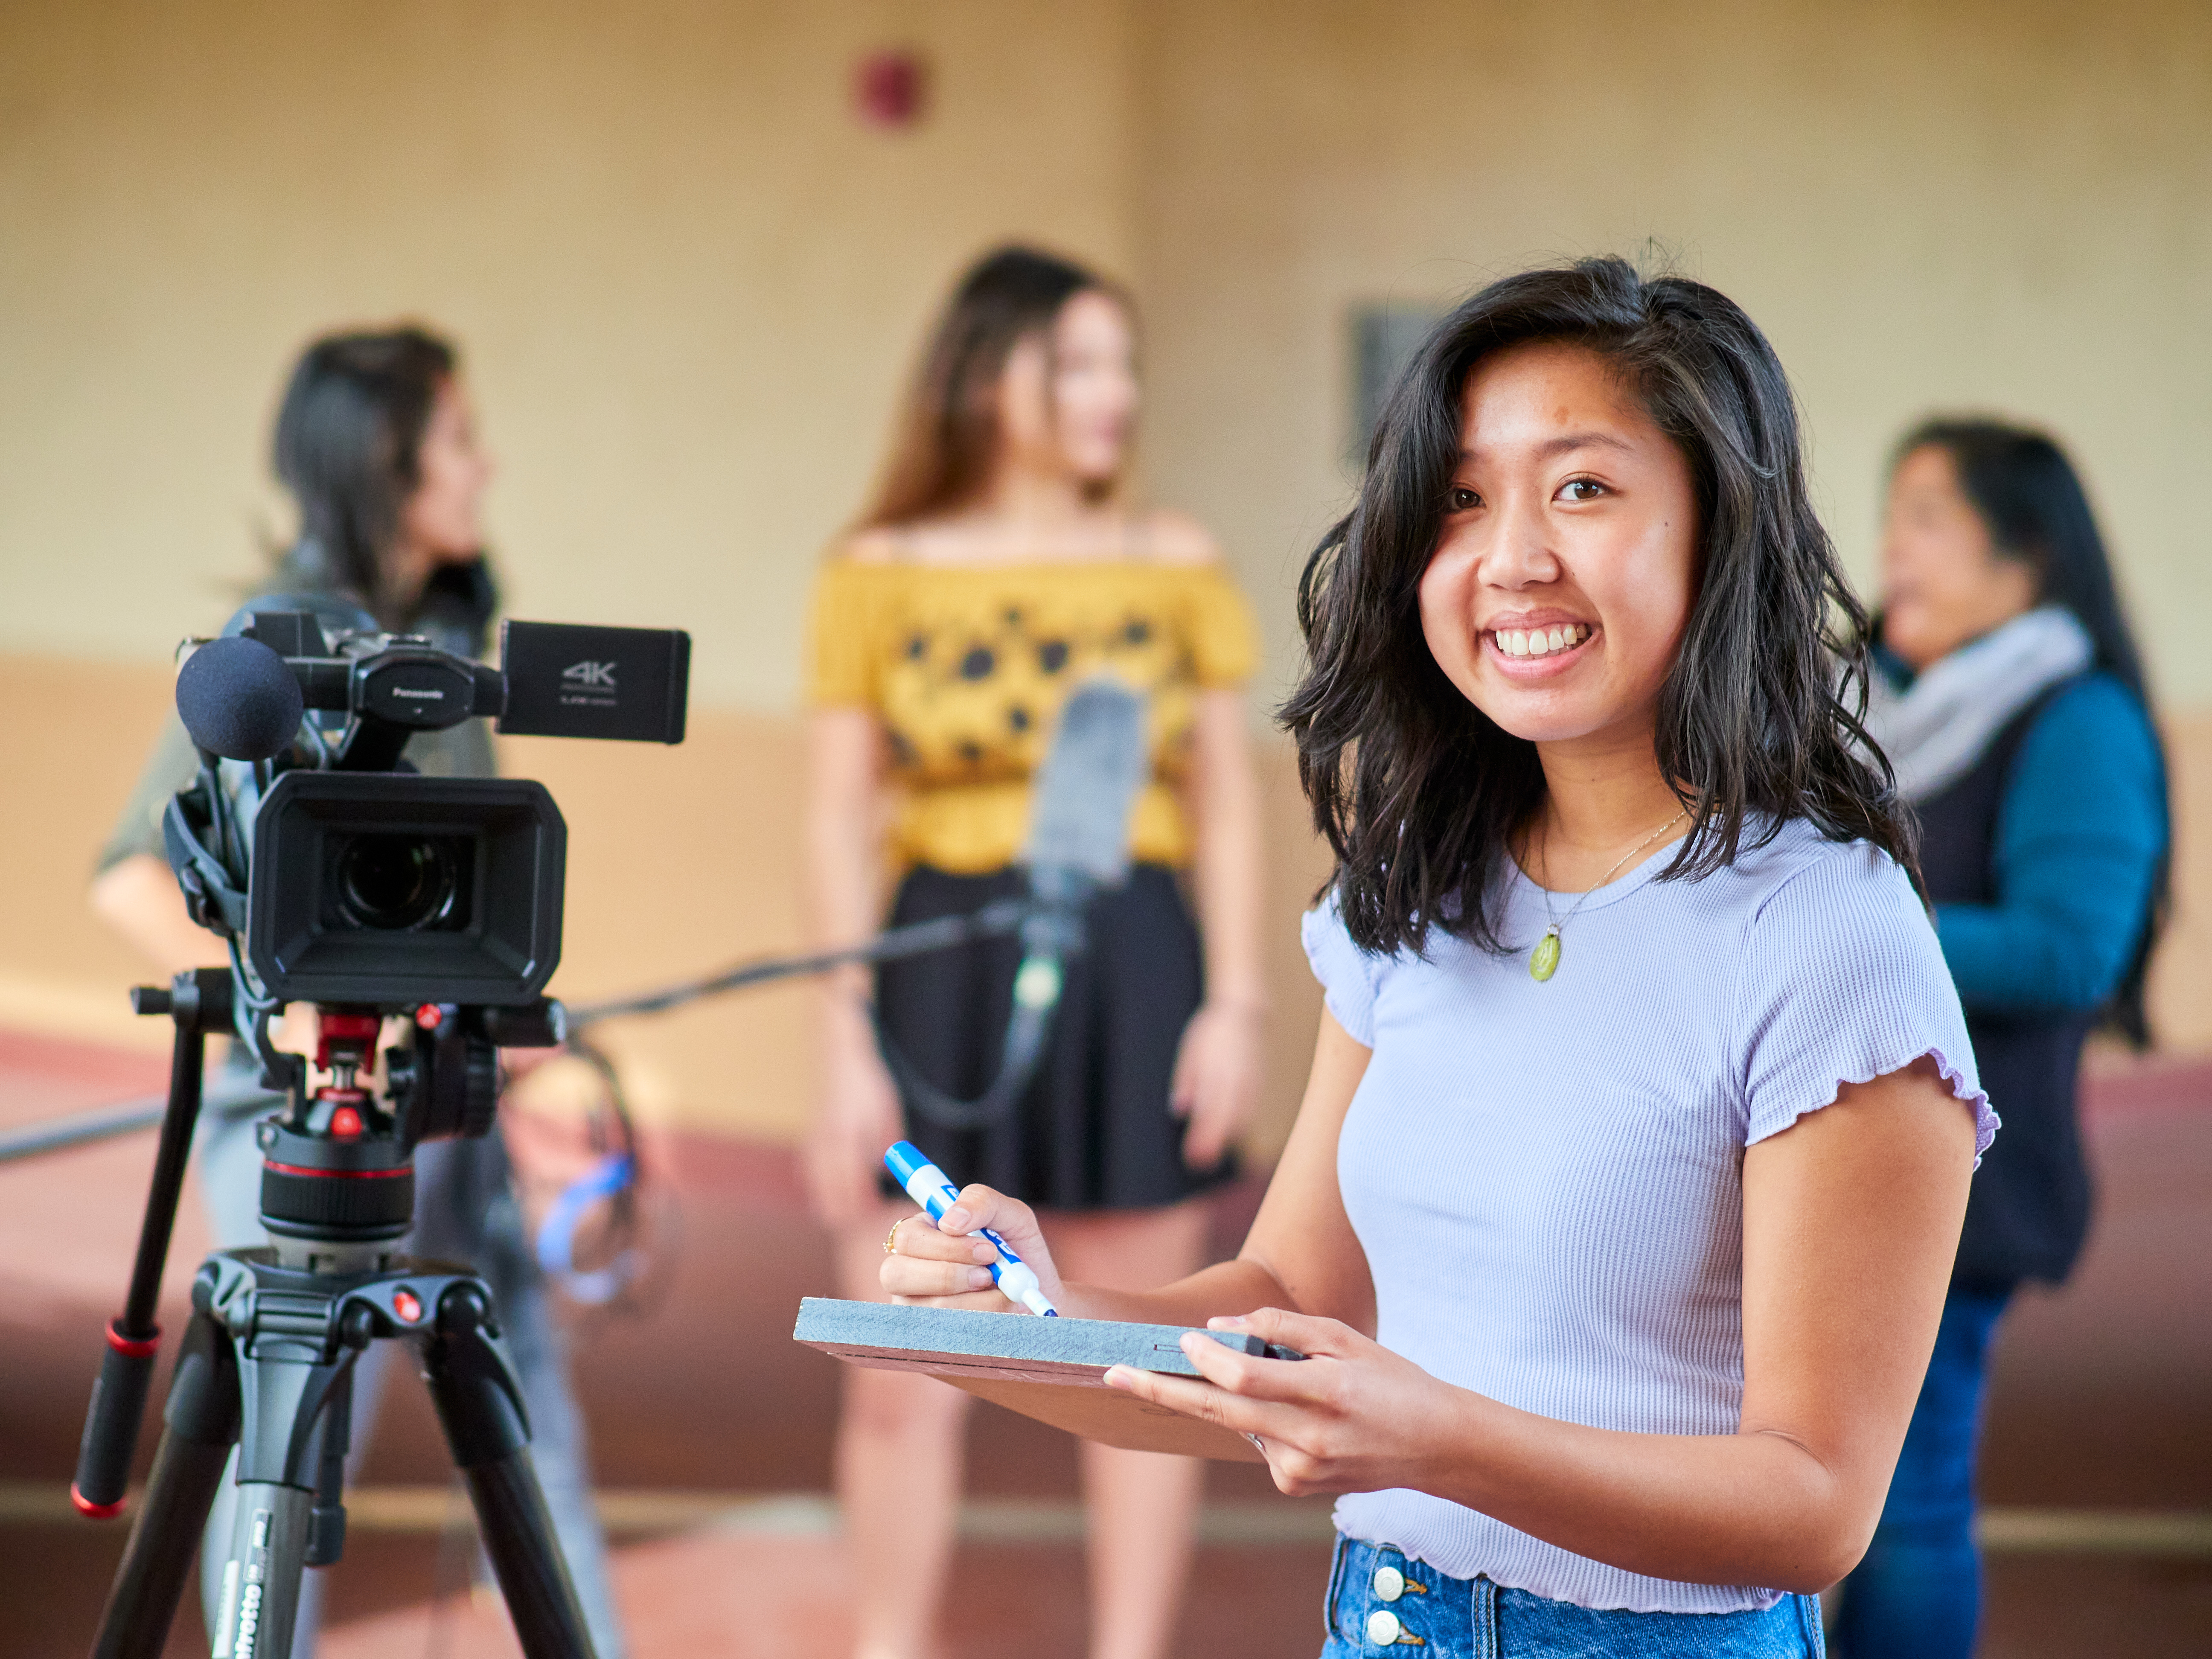 A student smiling and making notes next to a video camera